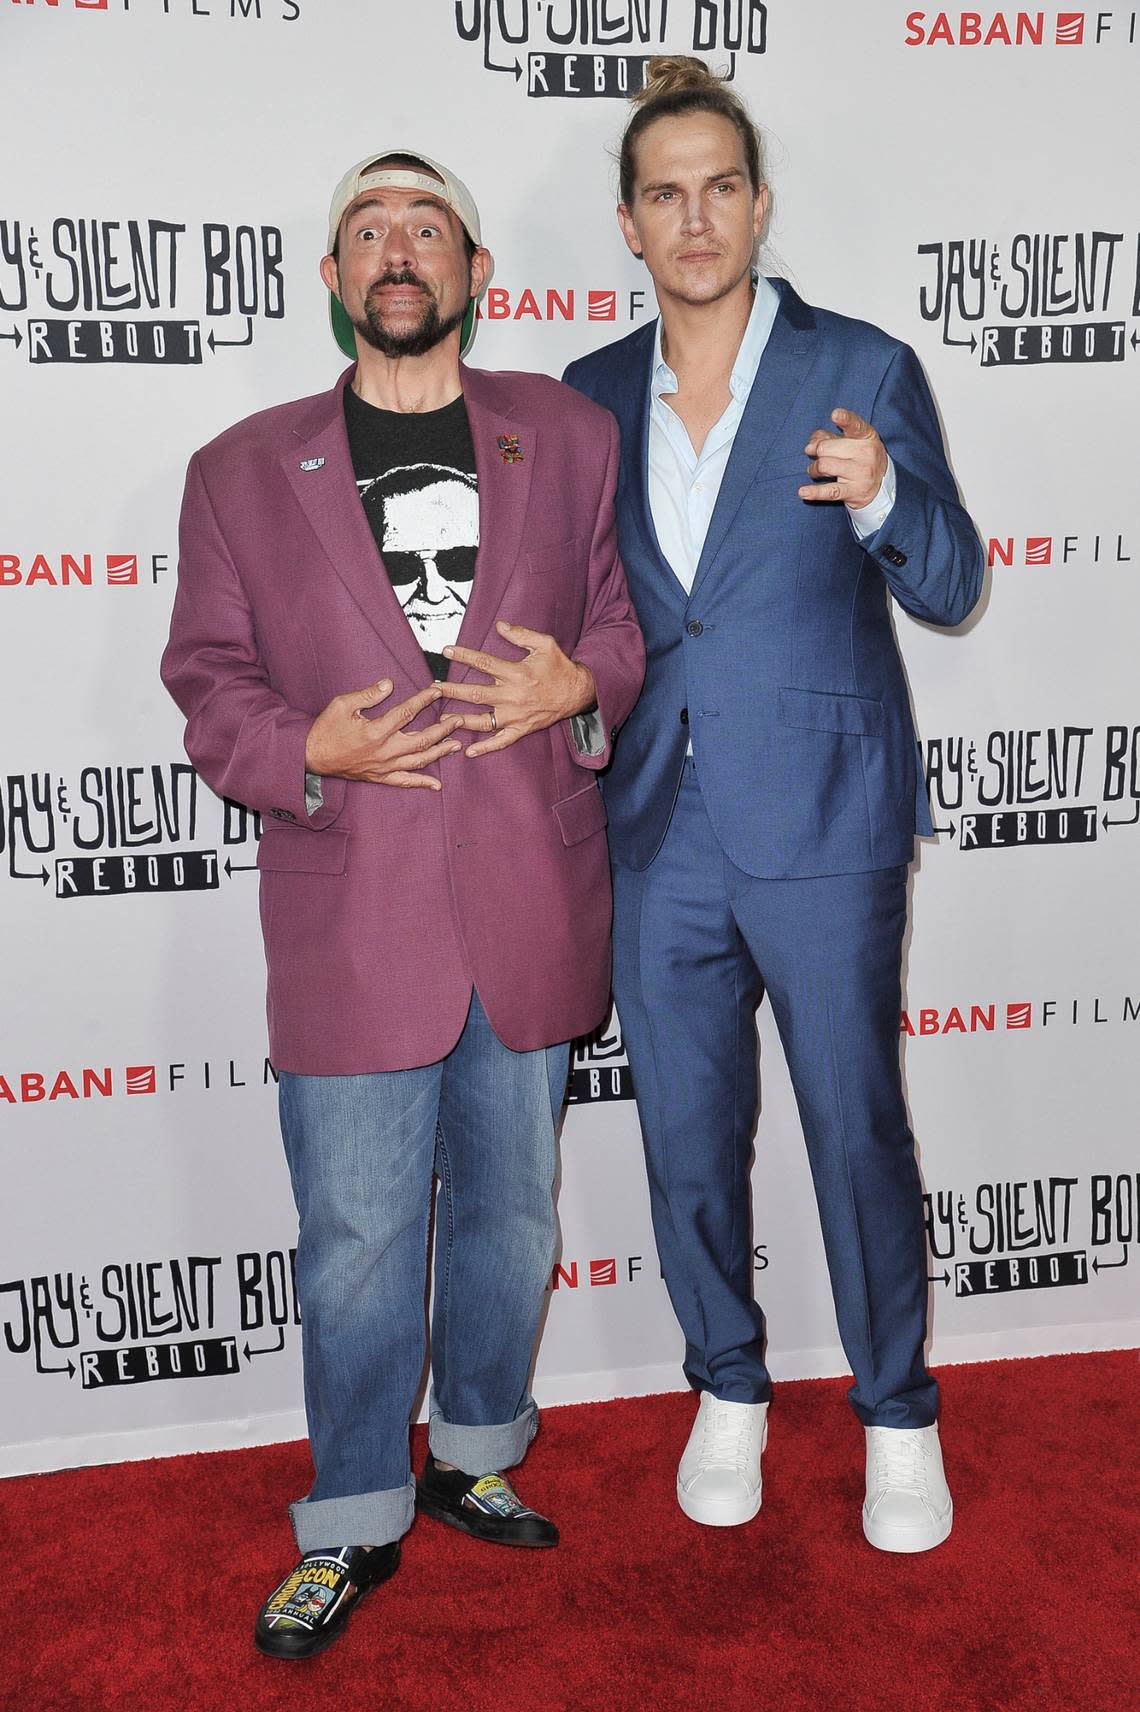 Kevin Smith, left, and Jason Mewes, aka, Jay and Silent Bob from the “Clerks” movies will be at the Lexington Comic & Toy Convention this weekend, as will other stars from Smith’s movies including Jason Lee, Jeremy London and Ethan Suplee.